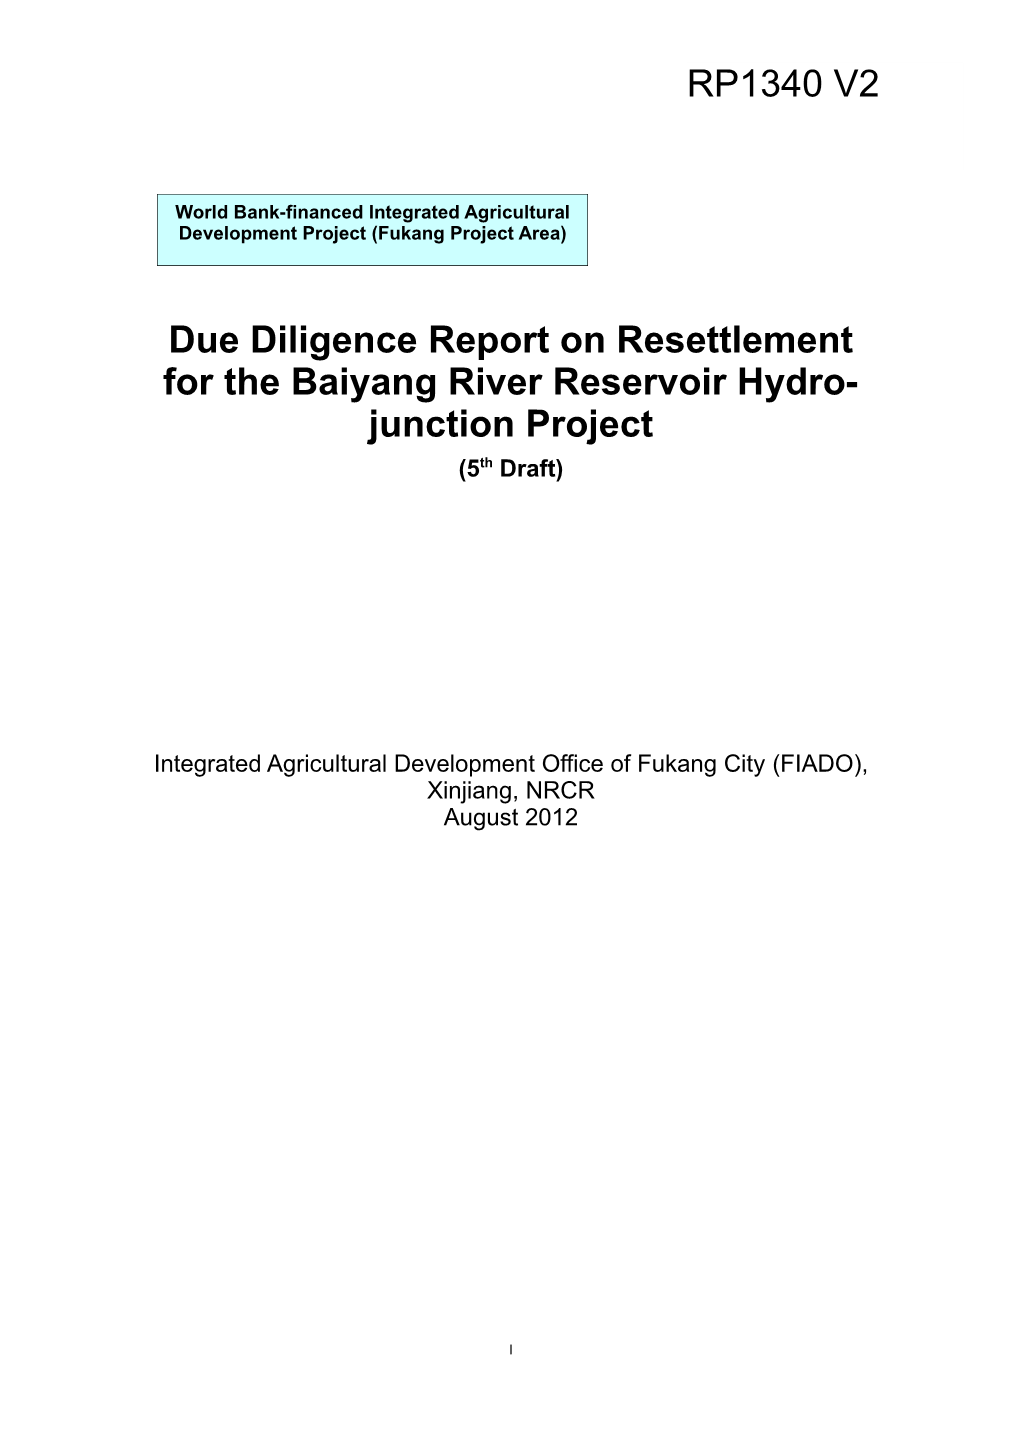 Due Diligence Report on Resettlement for the Baiyangriver Reservoir Hydro-Junction Project